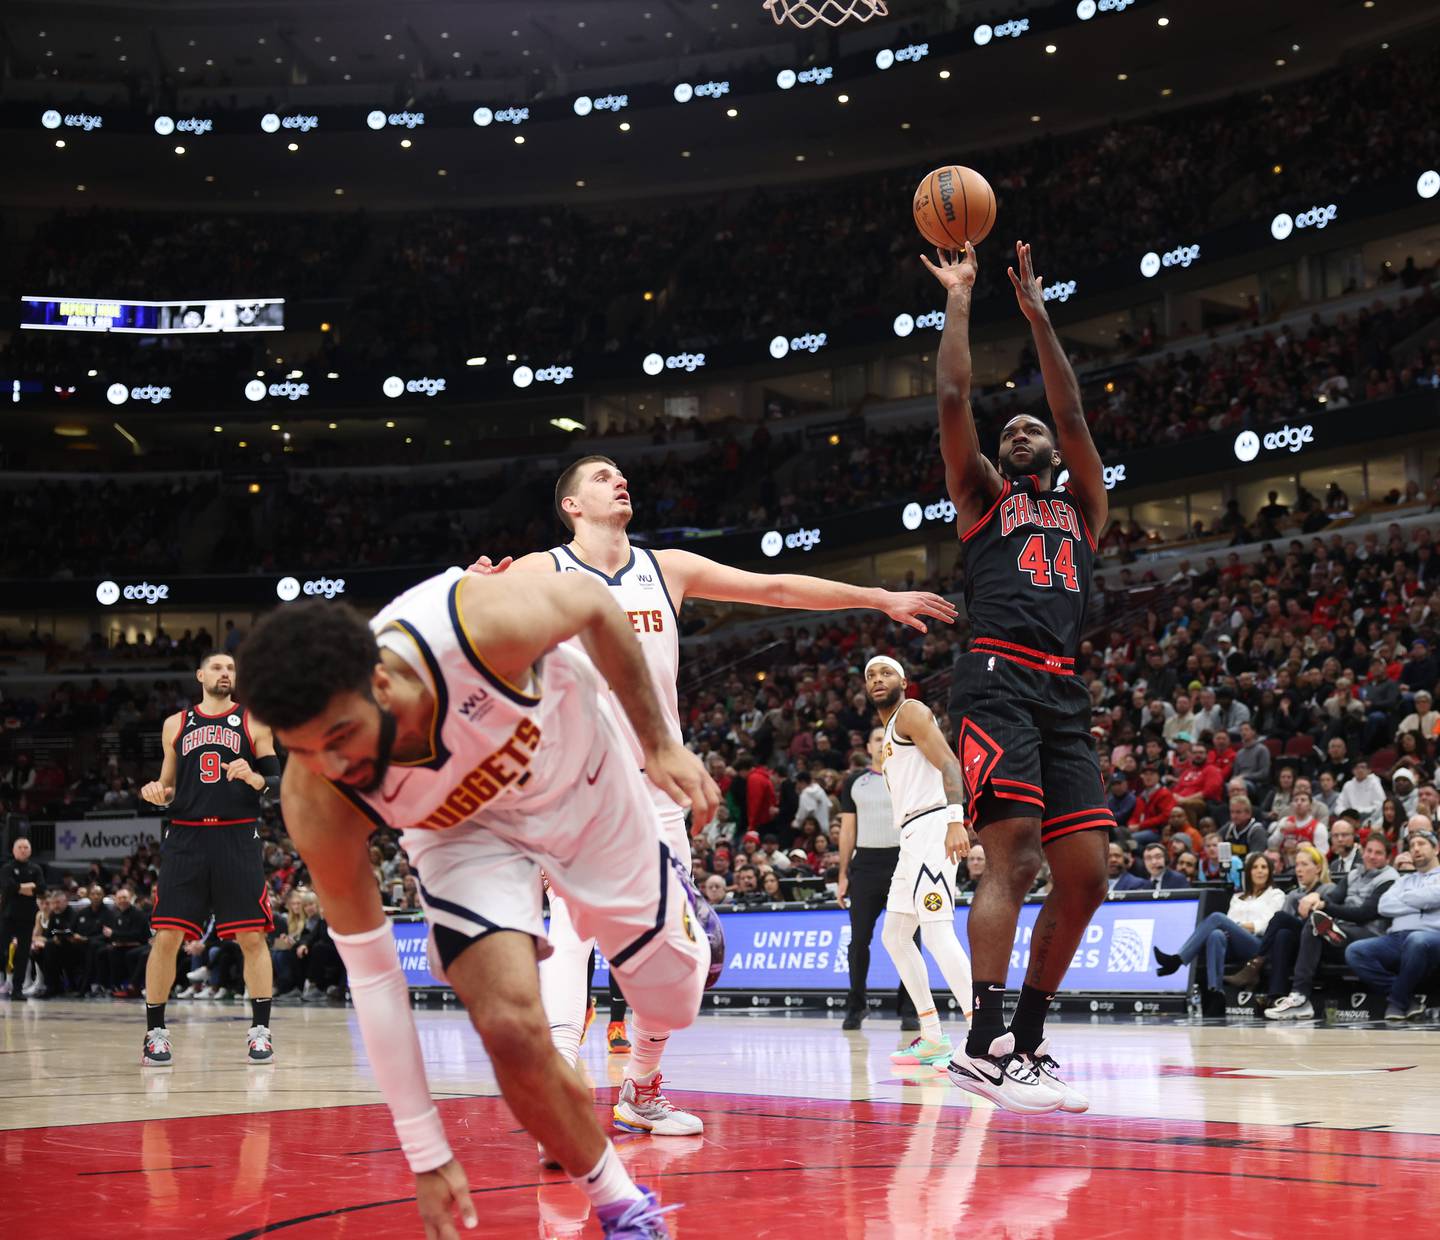 Chicago Bulls forward Patrick Williams (44) aims for a successful basket after being fouled by Denver Nuggets guard Jamal Murray (27), left, in the second quarter at United Center on Nov. 13, 2022, in Chicago.